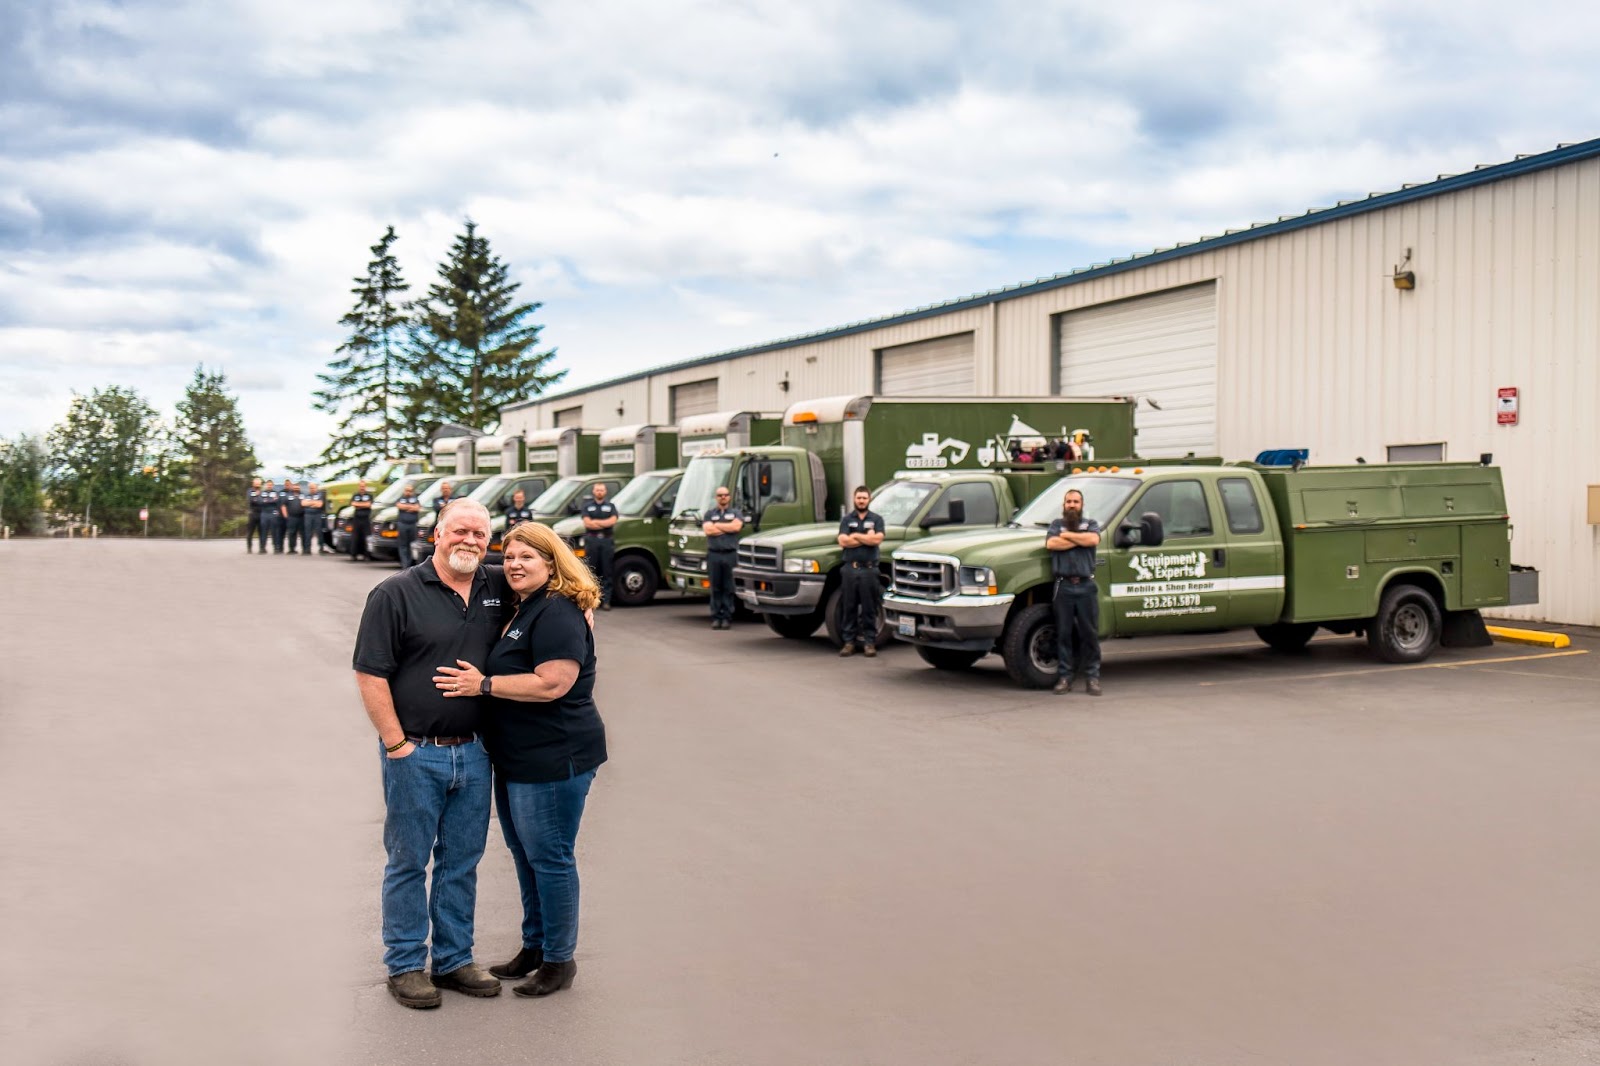 Equipment Experts, Inc. founders embracing in the foreground with trucks and mechanics lined up next to trucks in the background